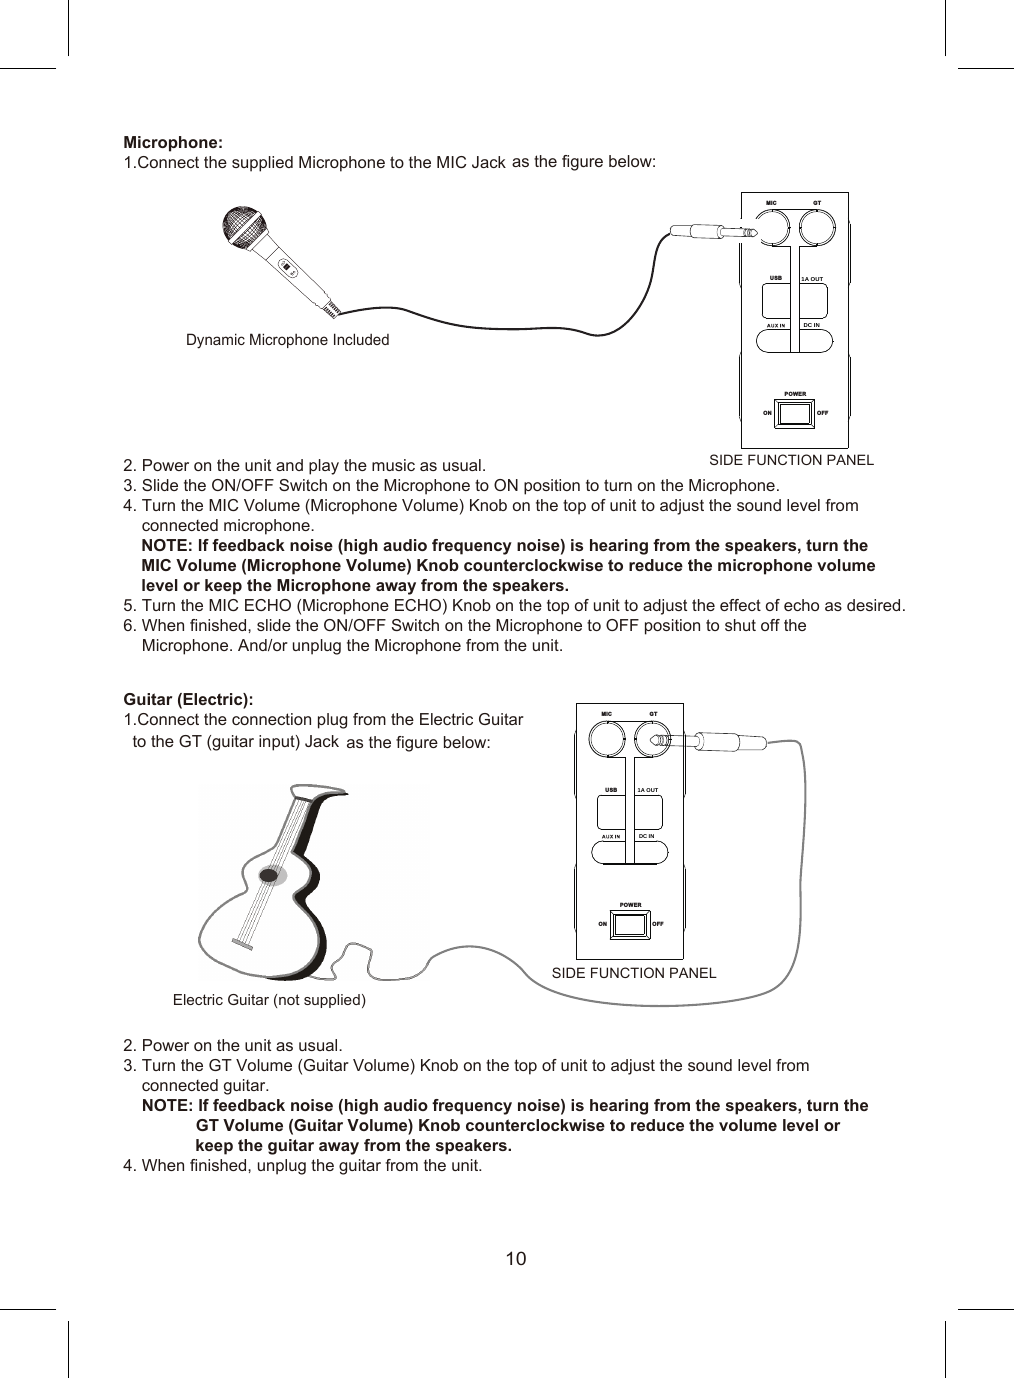 Microphone:2. Power on the unit and play the music as usual.3. Slide the ON/OFF Switch on the Microphone to ON position to turn on the Microphone.4. Turn the MIC Volume (Microphone Volume) Knob on the top of unit to adjust the sound level from     connected microphone.   NOTE: If feedback noise (high audio frequency noise) is hearing from the speakers, turn the    MIC Volume (Microphone Volume) Knob counterclockwise to reduce the microphone volume     level or keep the Microphone away from the speakers.5. Turn the MIC ECHO (Microphone ECHO) Knob on the top of unit to adjust the effect of echo as desired.6. When finished, slide the ON/OFF Switch on the Microphone to OFF position to shut off the     Microphone. And/or unplug the Microphone from the unit. Guitar (Electric):as the figure below:2. Power on the unit as usual.3. Turn the GT Volume (Guitar Volume) Knob on the top of unit to adjust the sound level from    connected guitar.    NOTE: If feedback noise (high audio frequency noise) is hearing from the speakers, turn the                 GT Volume (Guitar Volume) Knob counterclockwise to reduce the volume level or                  keep the guitar away from the speakers.4. When finished, unplug the guitar from the unit.Dynamic Microphone IncludedElectric Guitar (not supplied)MI C GTUS B PO WE RON O FF1.Connect the supplied Microphone to the MIC Jack as the figure below: MI C GTUS B PO WE RON O FF1.Connect the connection plug from the Electric Guitarto the GT (guitar input) Jack SIDE FUNCTION PANELSIDE FUNCTION PANEL101A  OUTDC  IN1A  OUTDC  IN